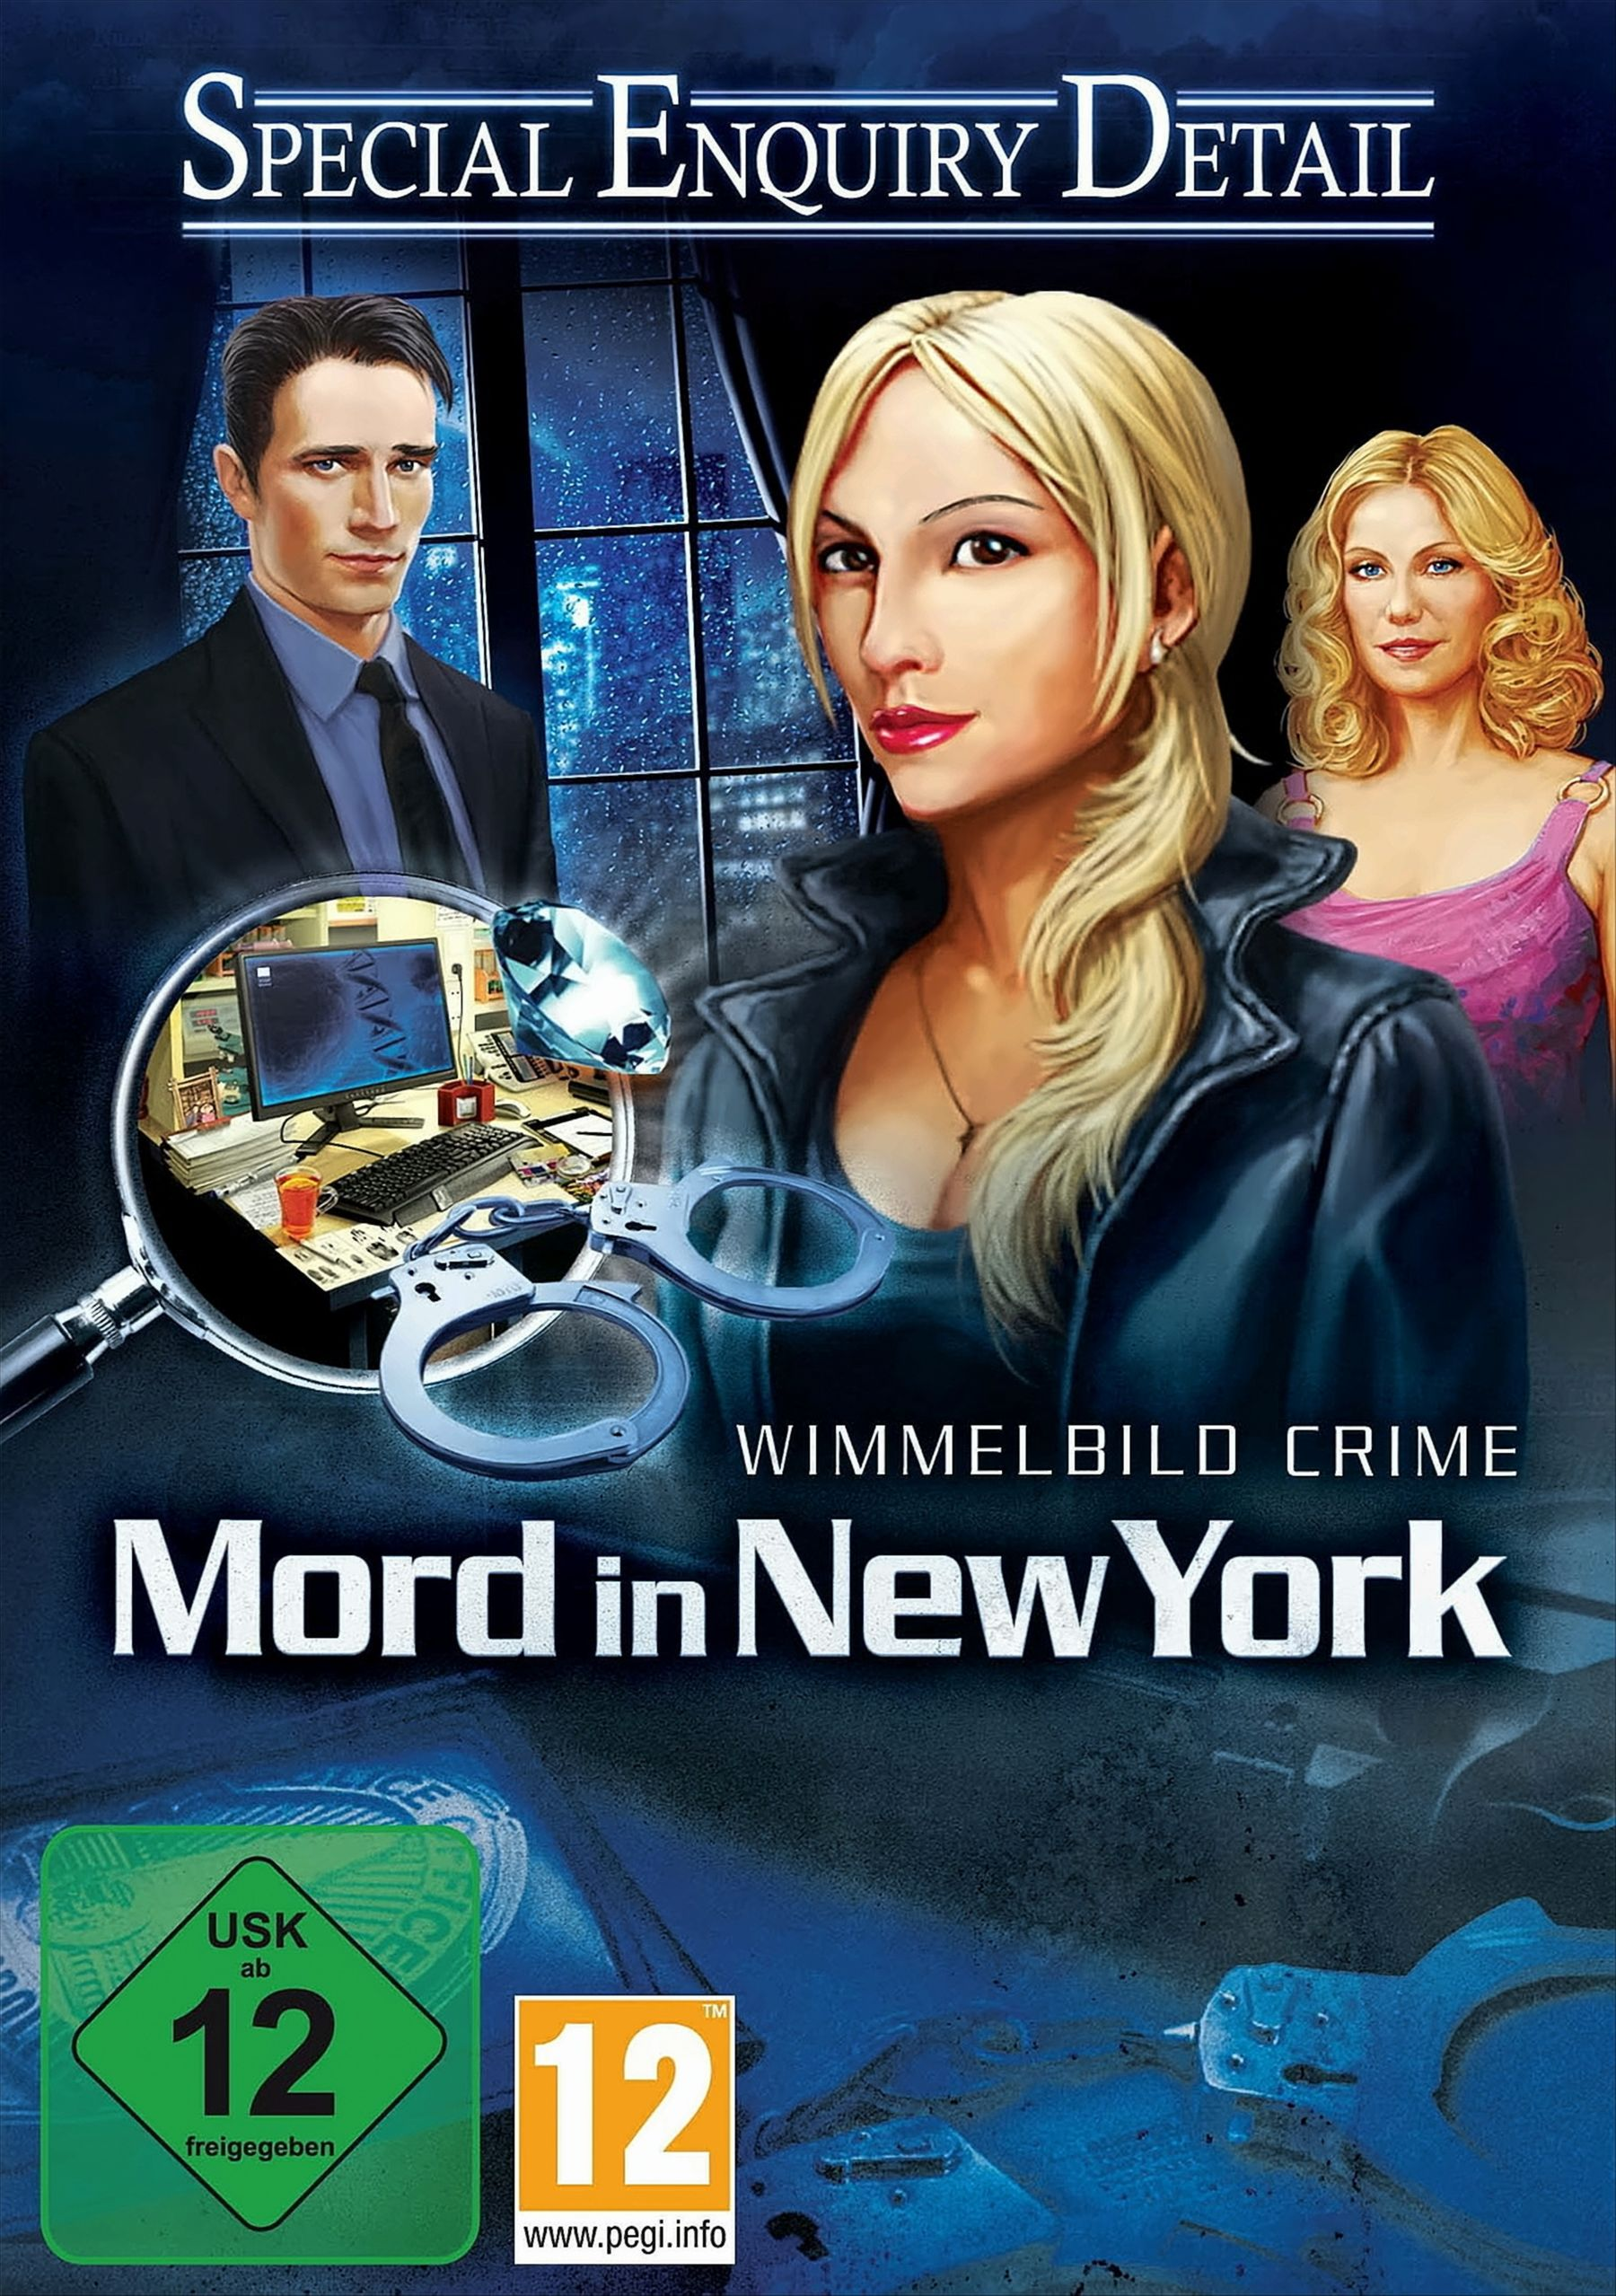 Special Enquiry Detail: Mord New [PC] in York 